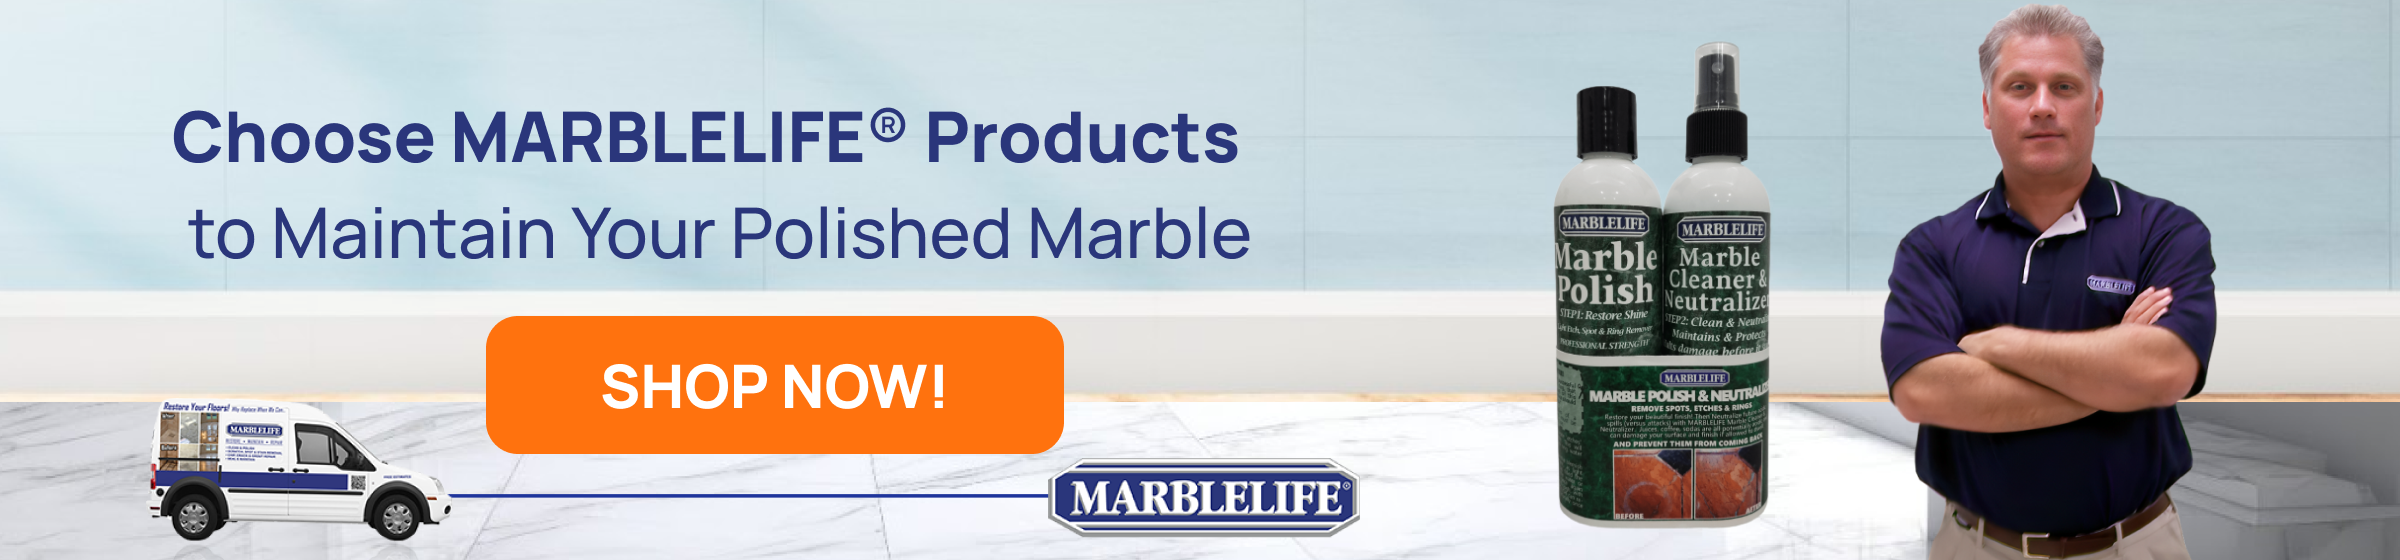 MARBLELIFE PRODUCTS SHOP NOW